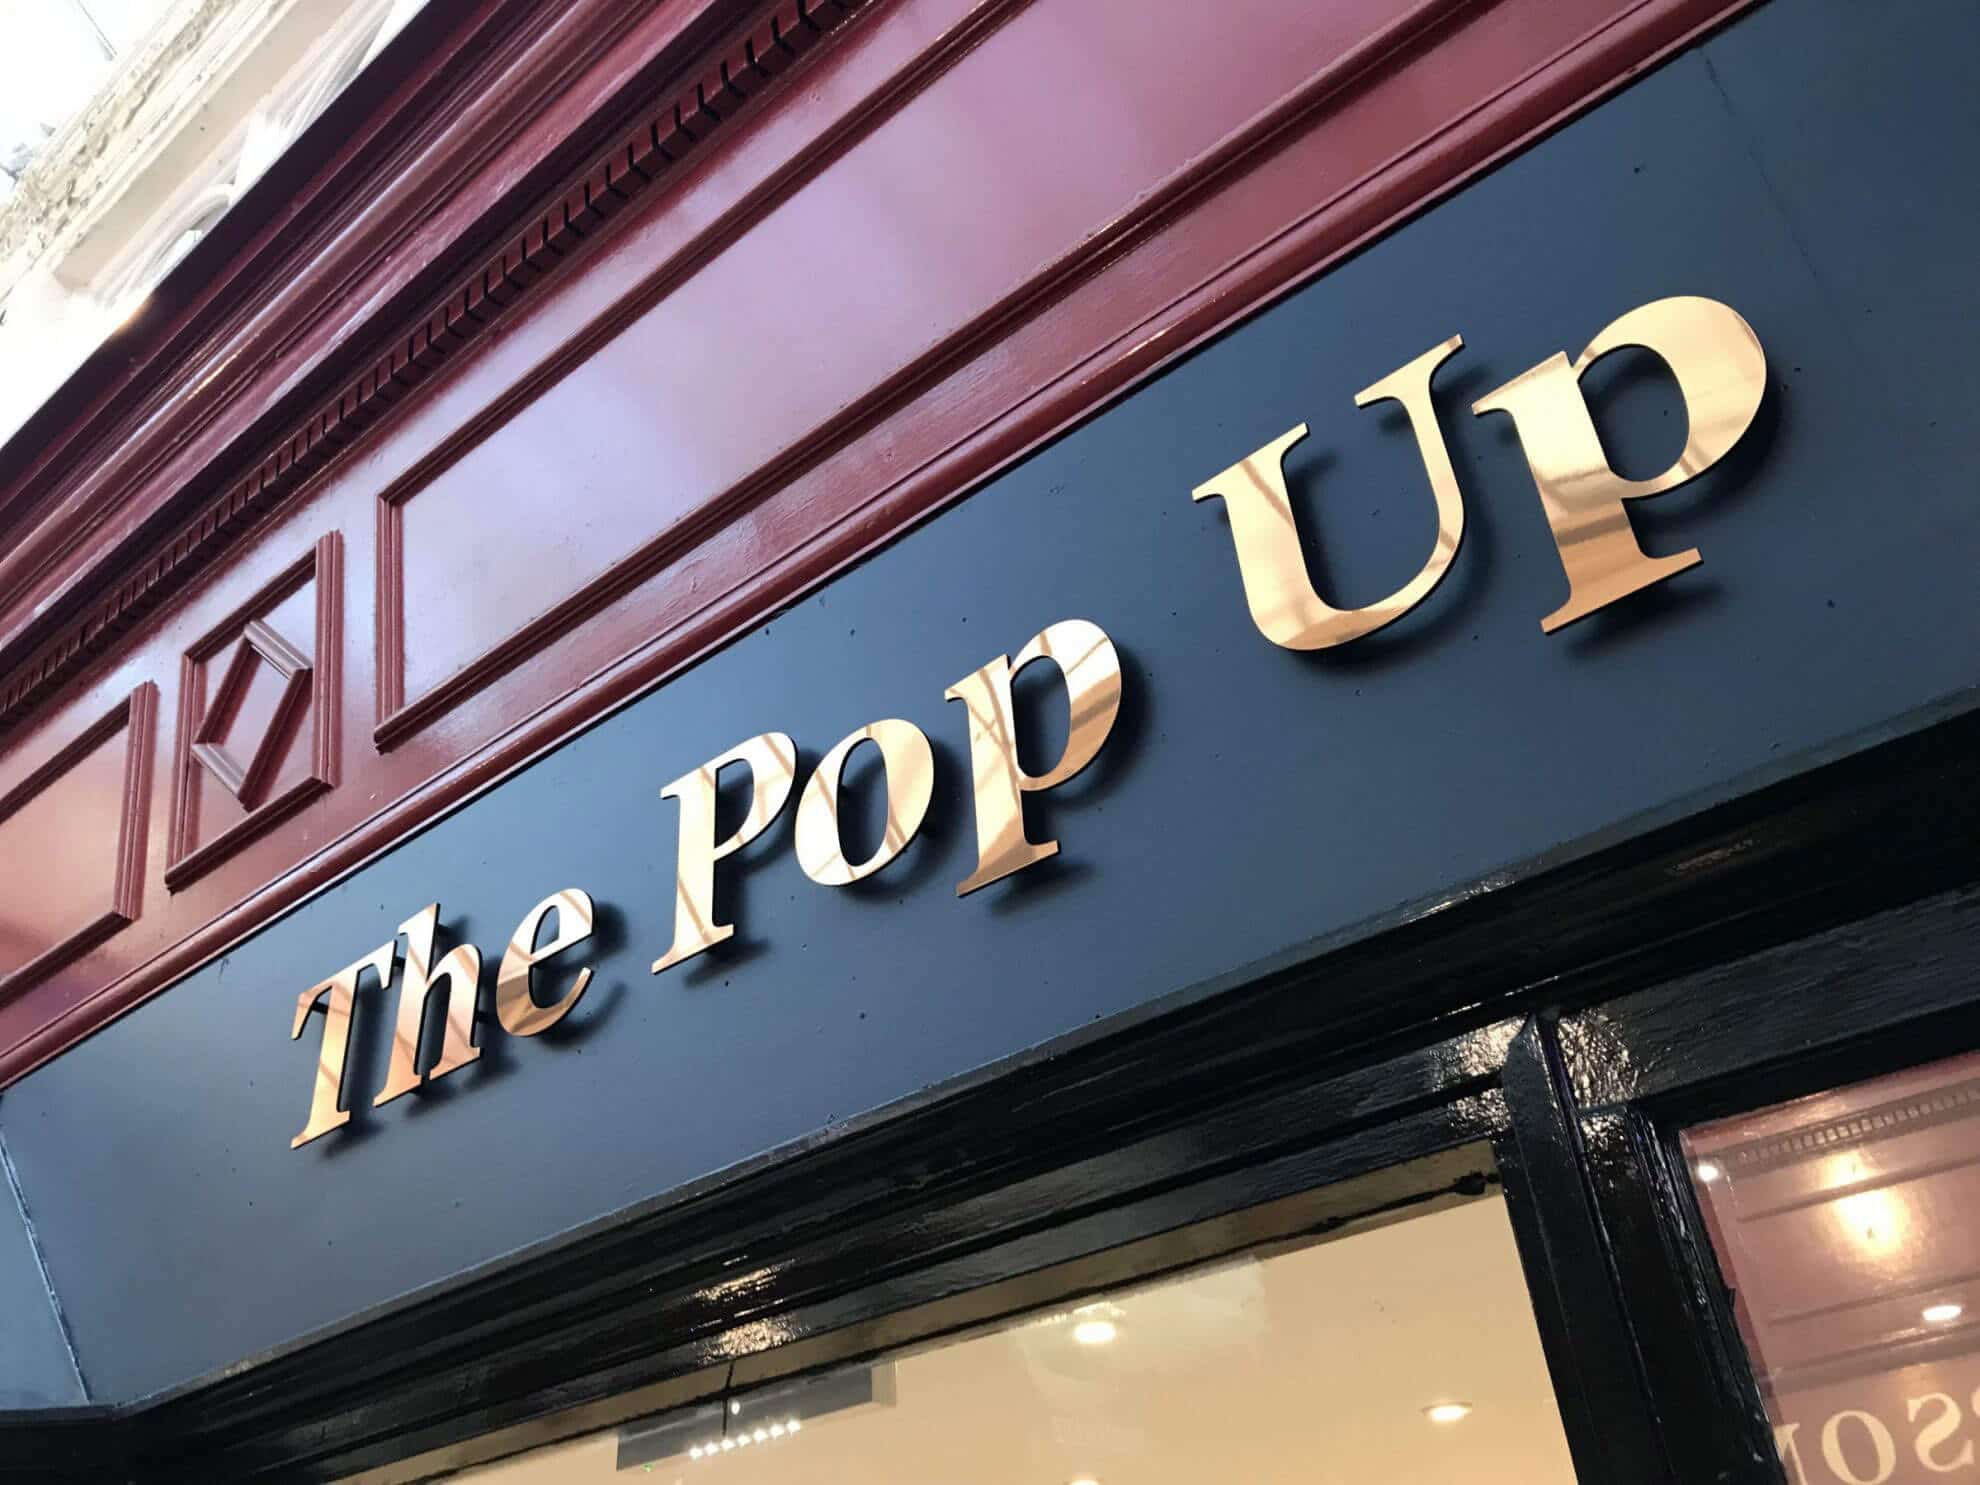 The Pop Up sign